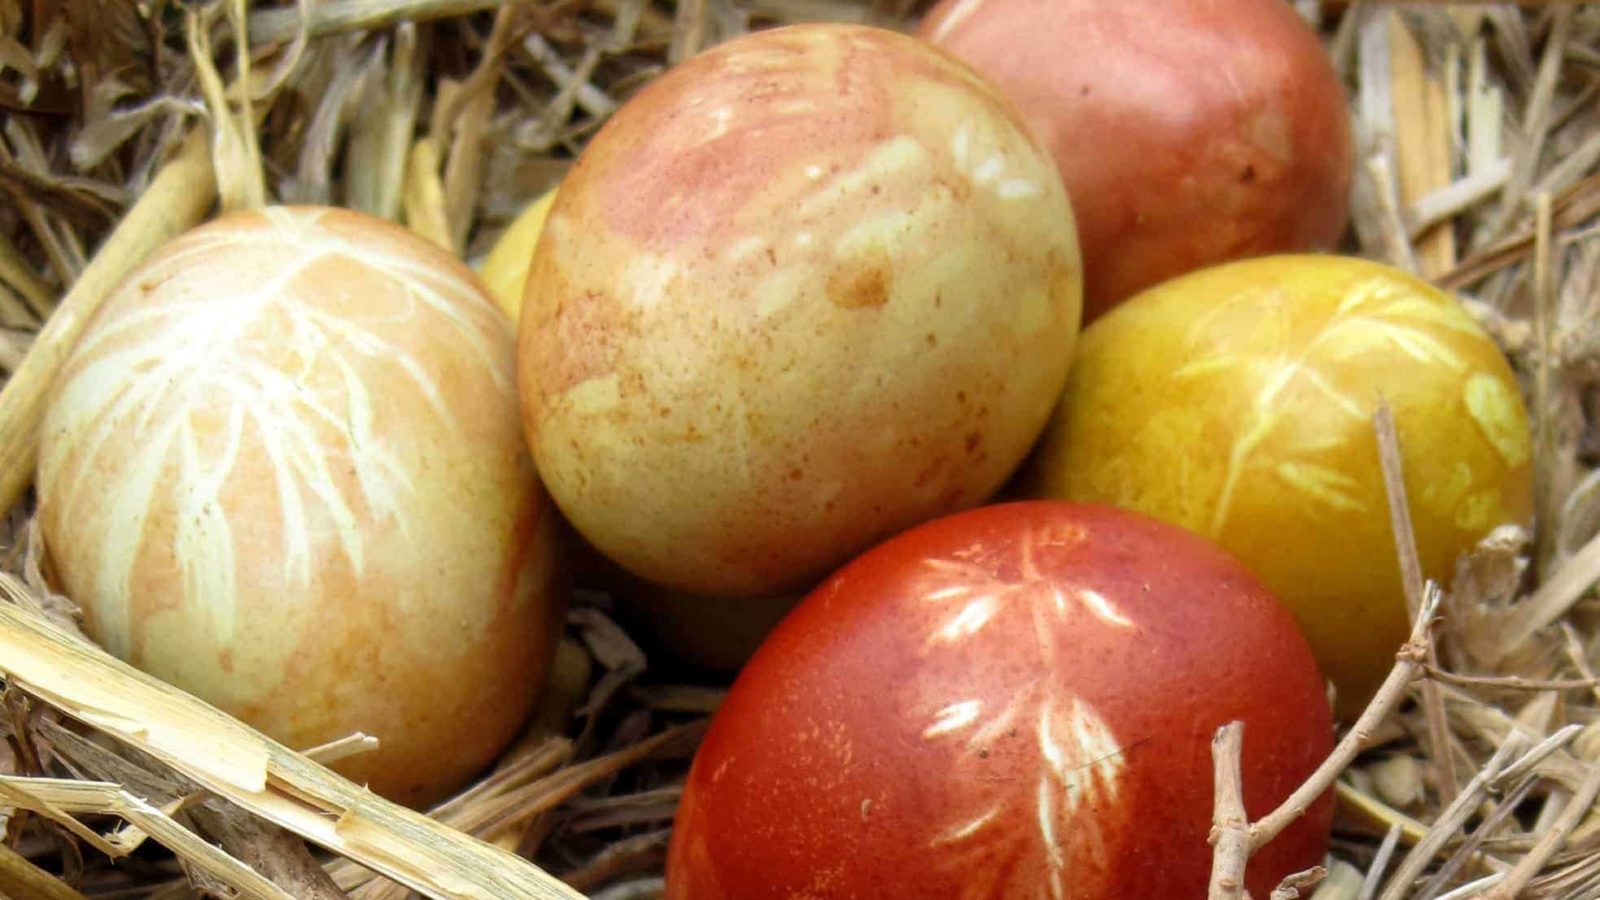 Easter eggs dyed with onion skin show light patterns of leaves against deep red and gold color.